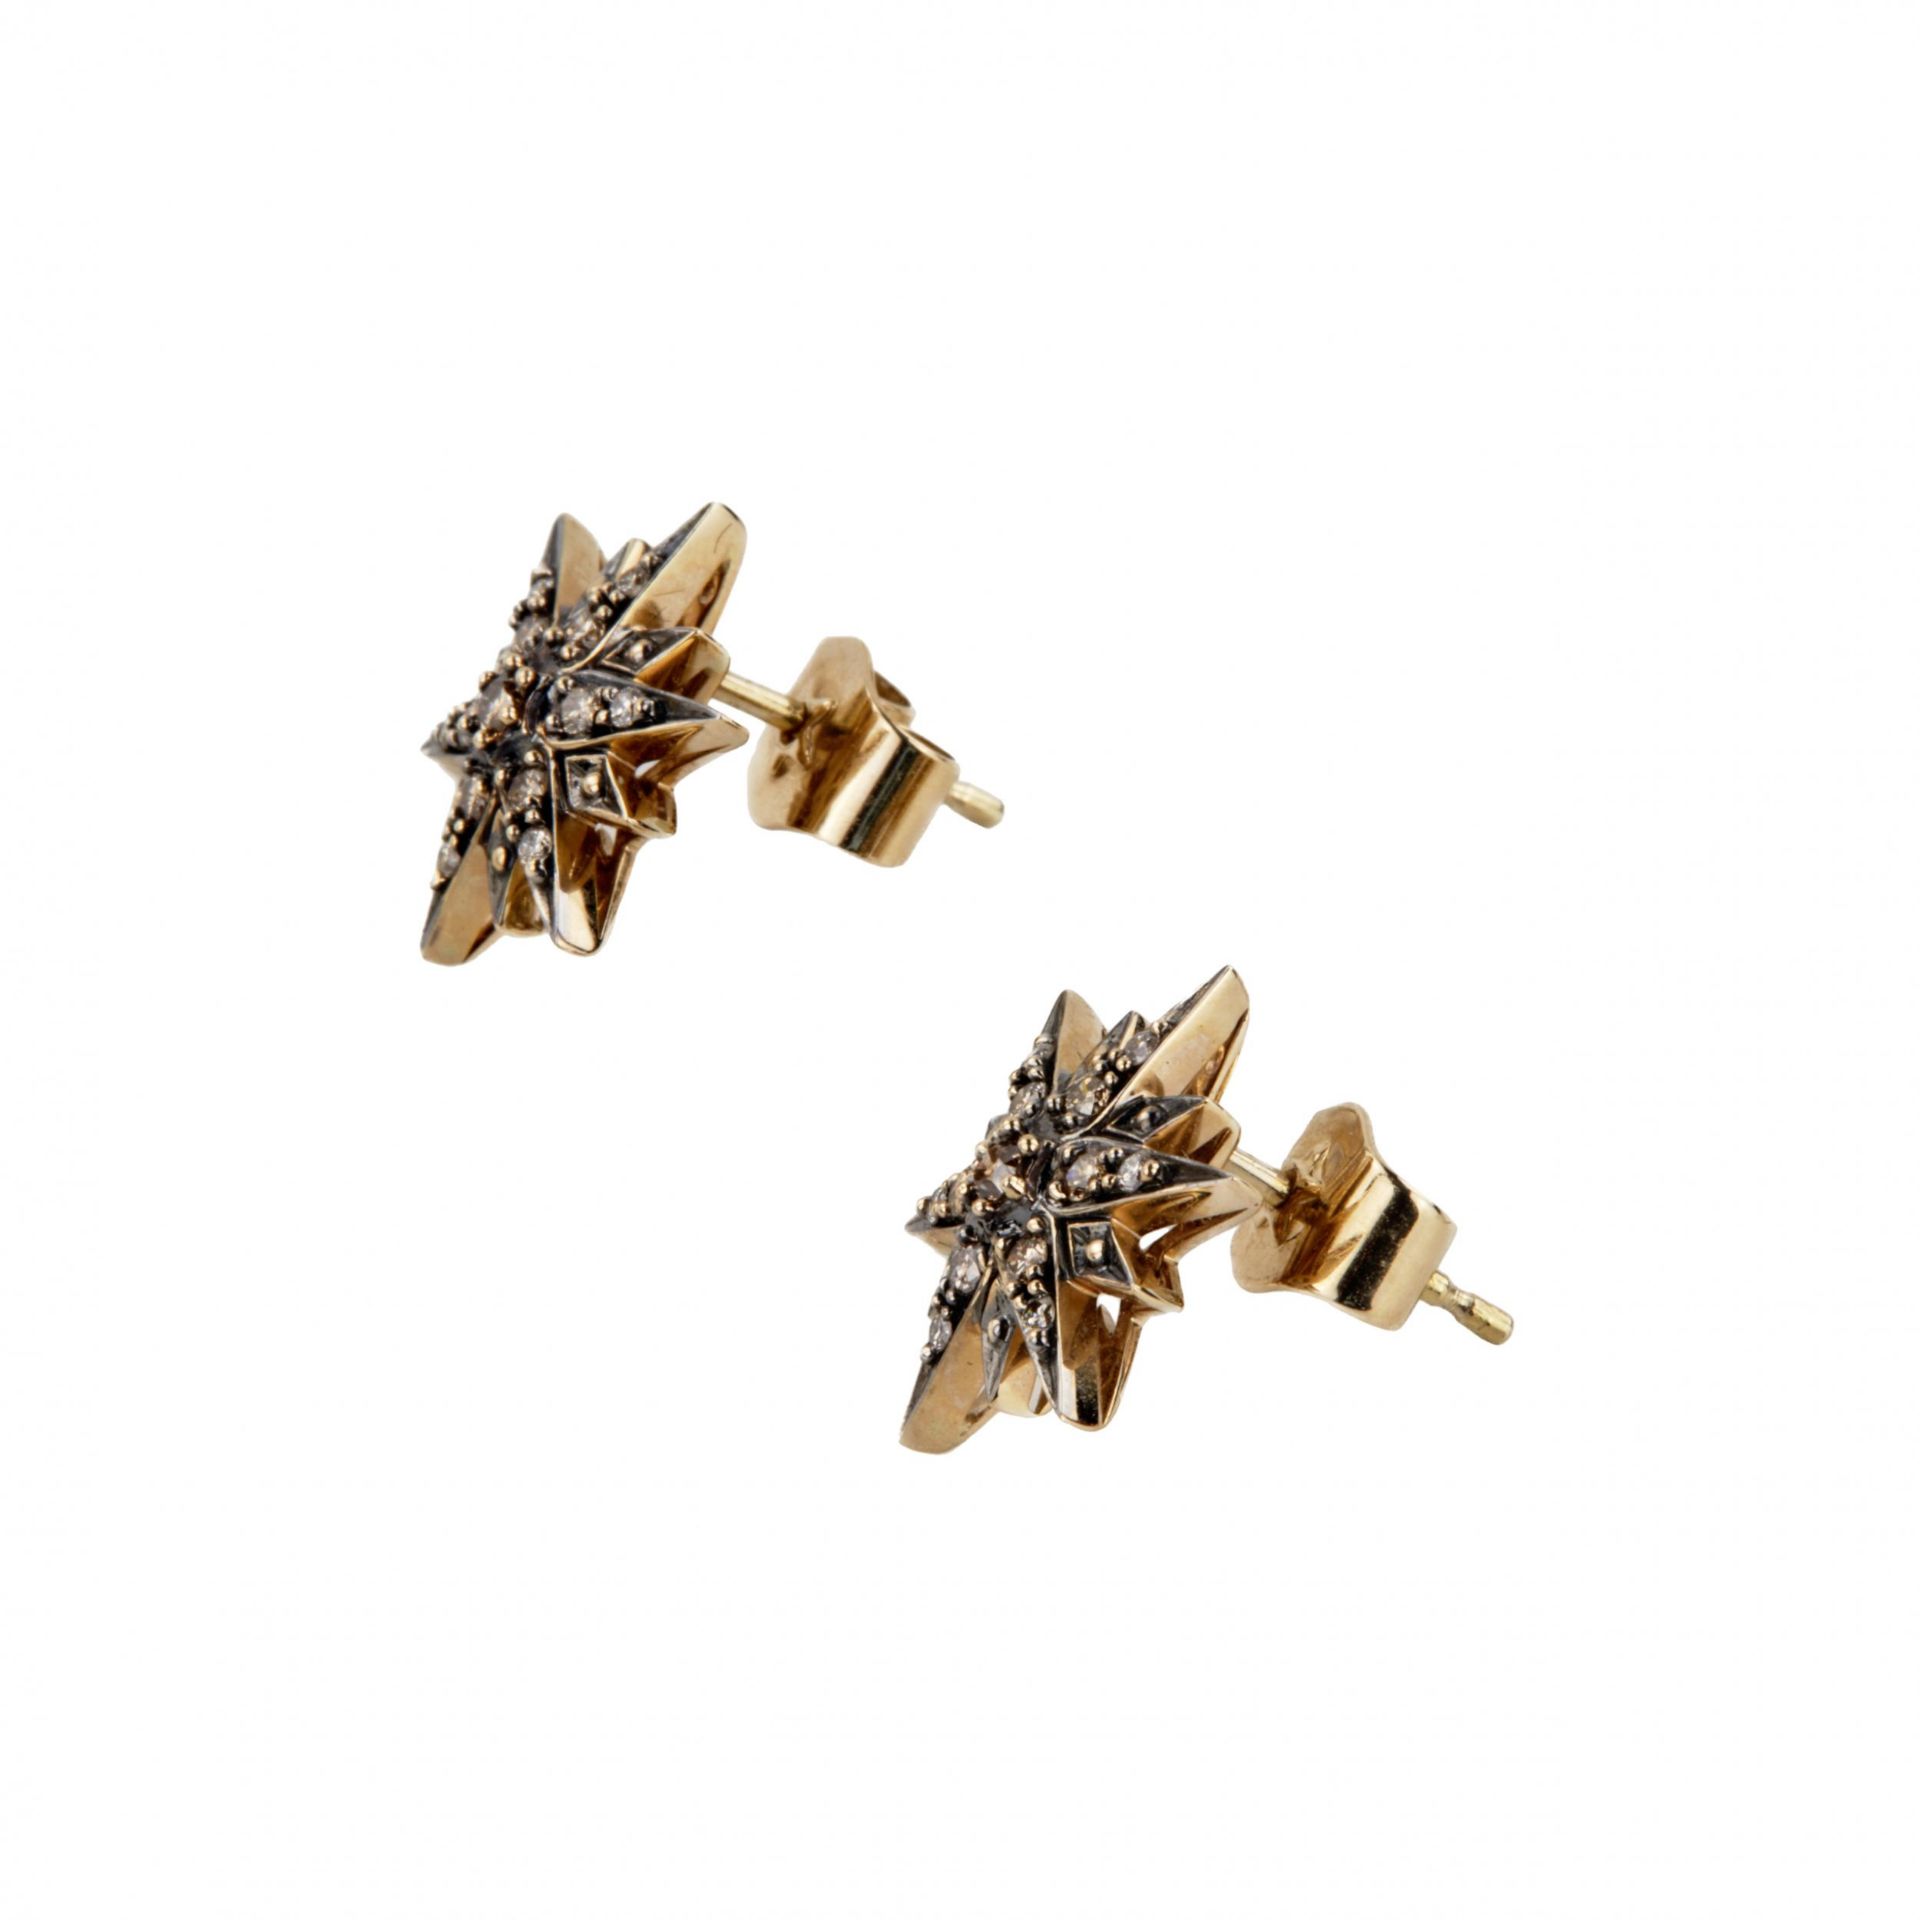 Gold ring and earrings with diamonds. H. Stern. From the Stars collection. - Bild 7 aus 9